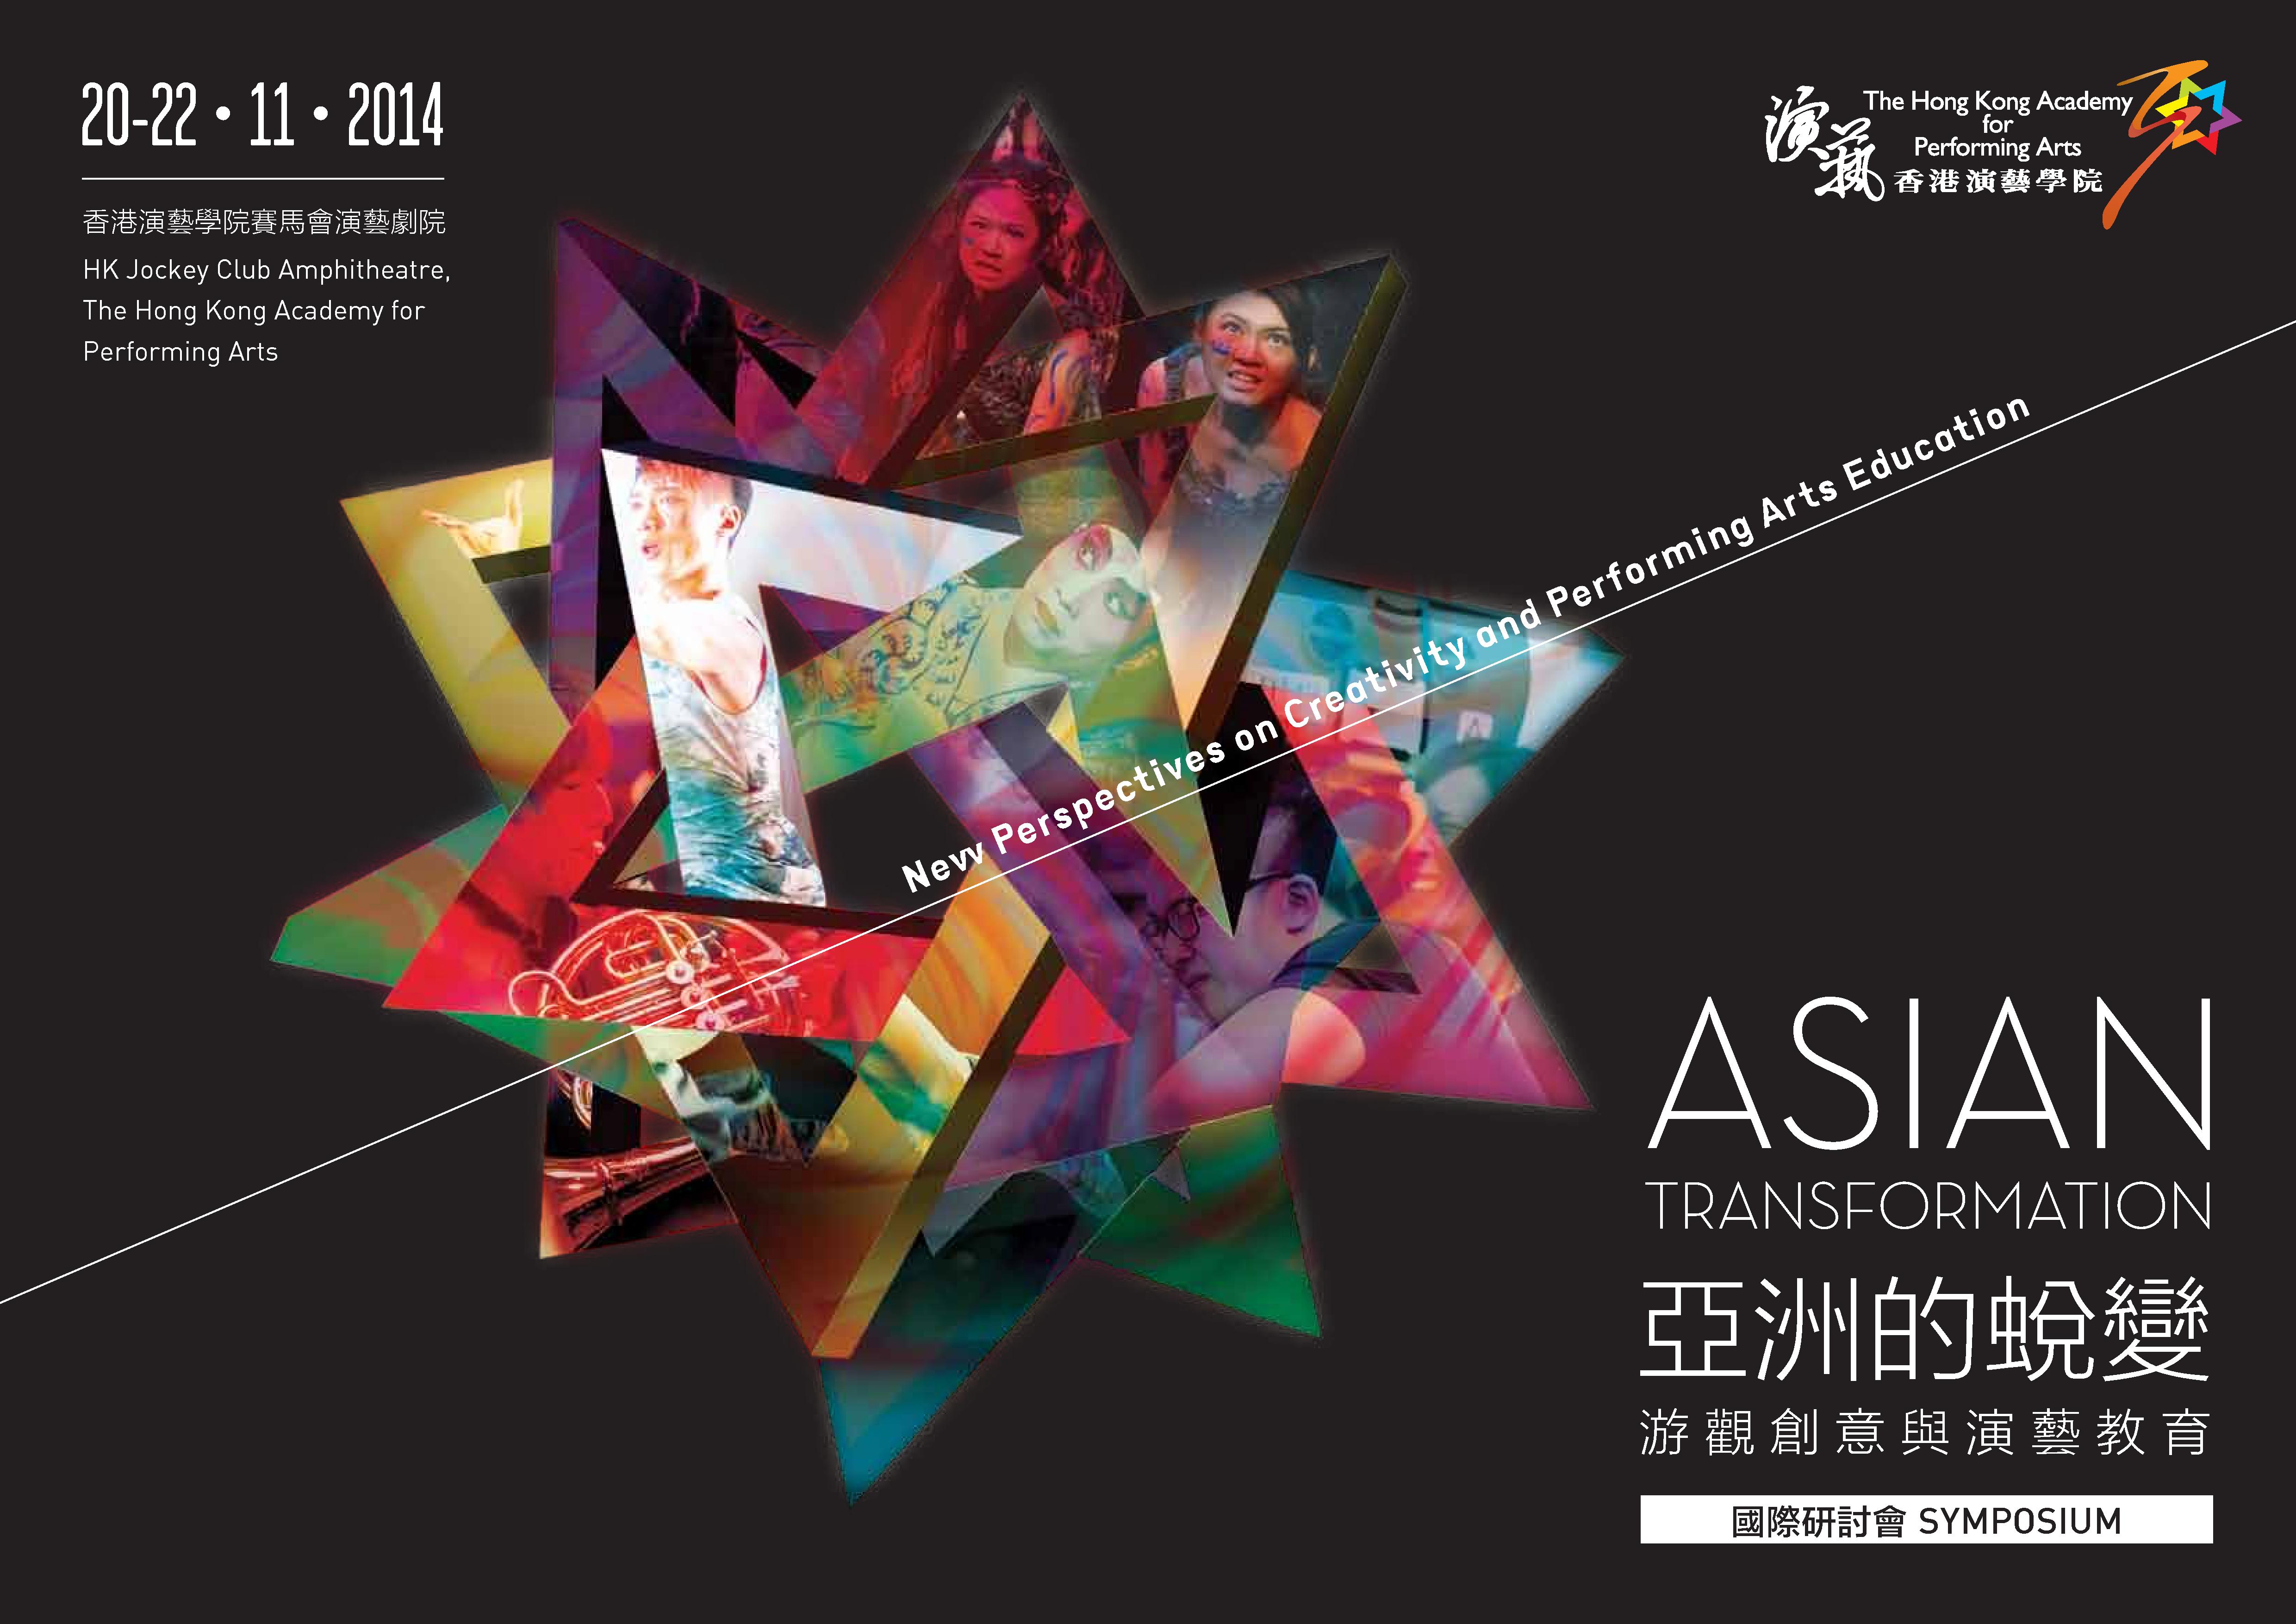 Performing Arts Symposium – Asian Transformation: New Perspectives on Creativity and Performing Arts Education